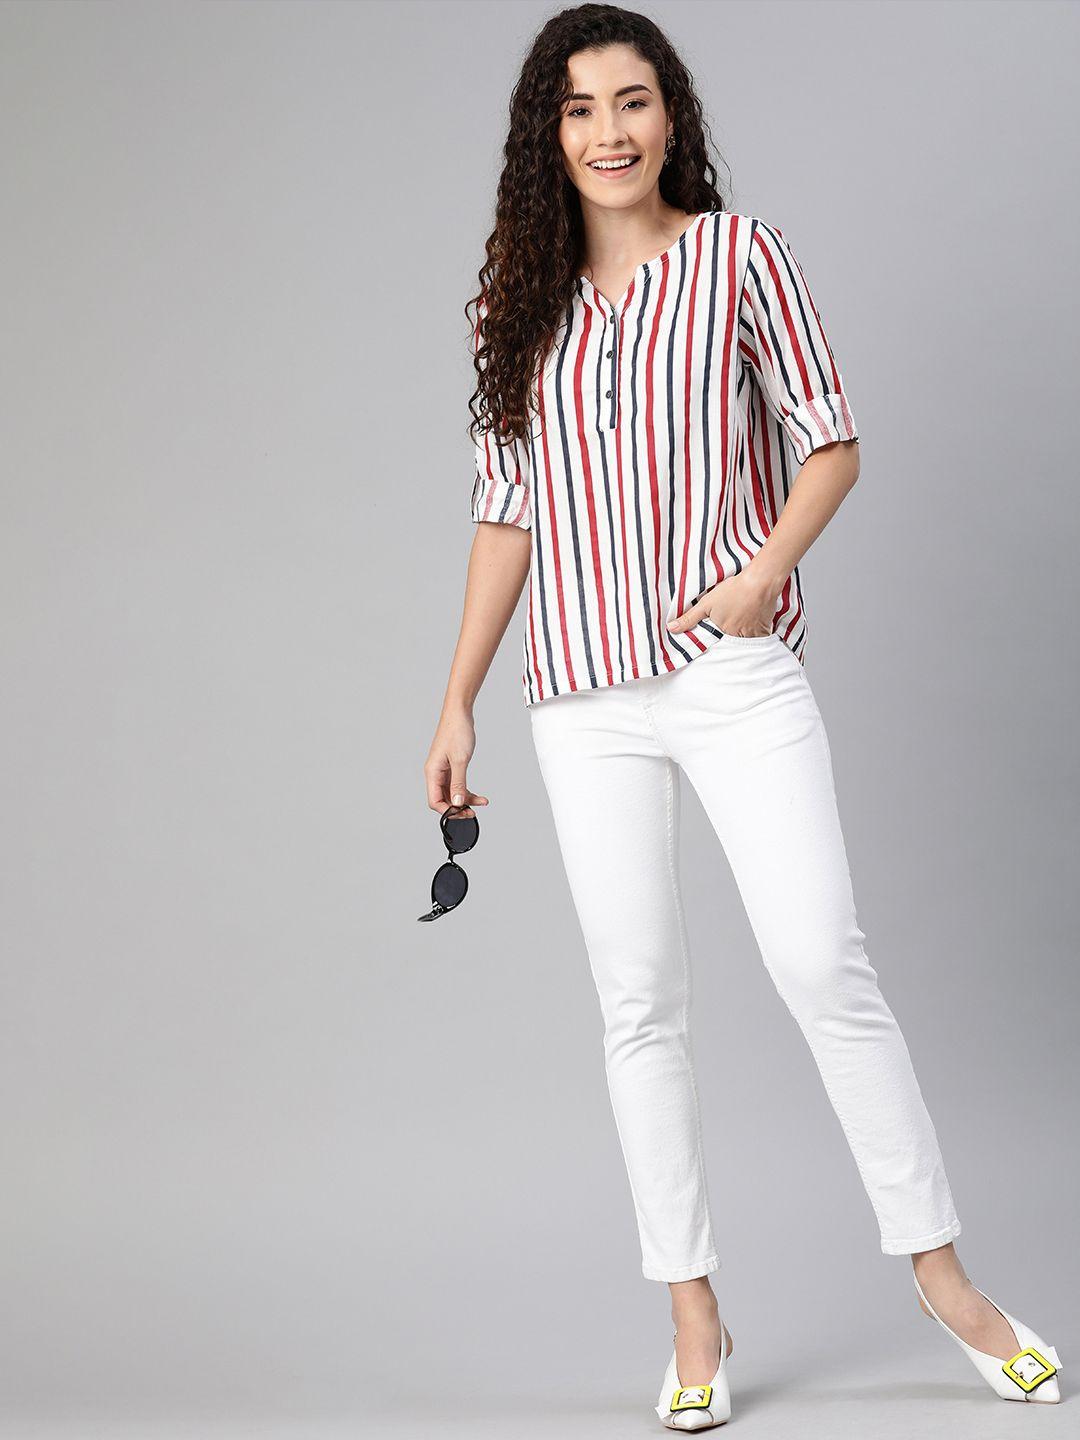 here&now white striped shirt style top